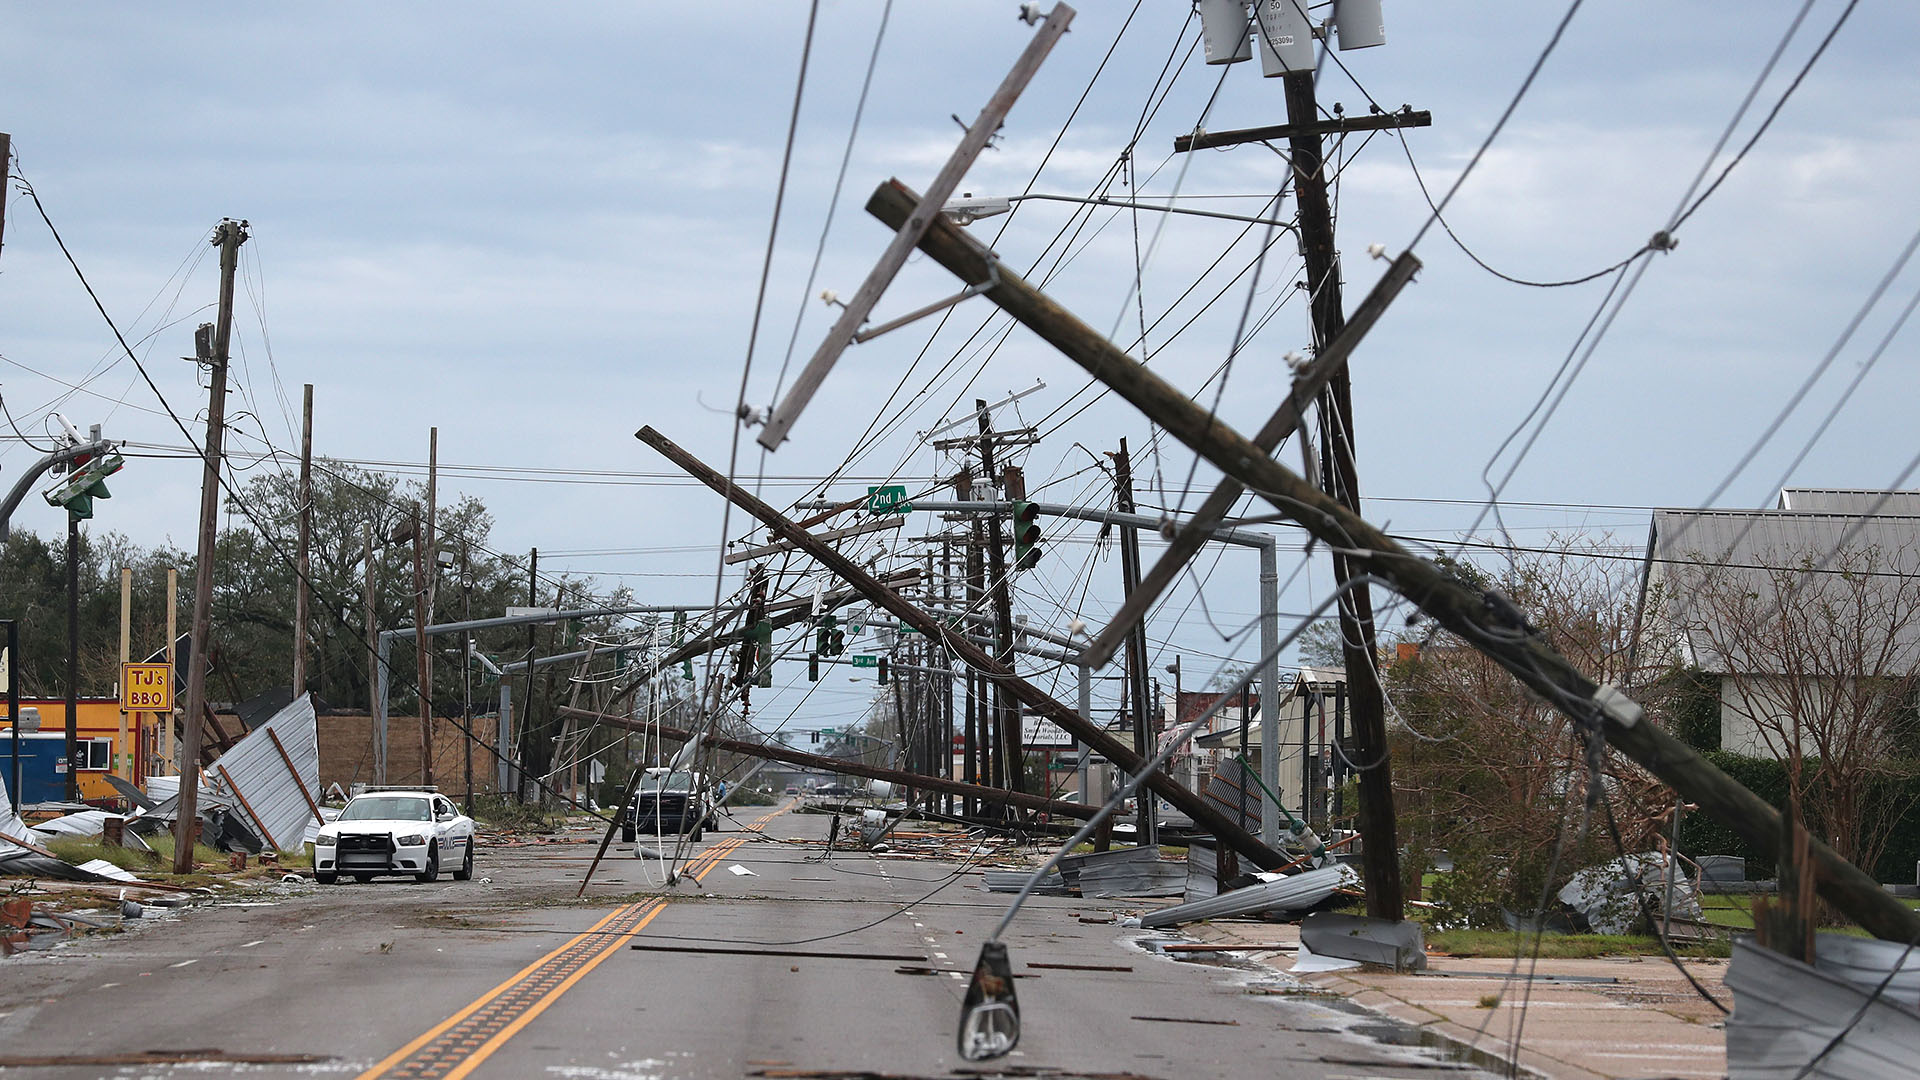 LAKE CHARLES, LOUISIANA - AUGUST 27: A street is seen strewn with debris and downed power lines after Hurricane Laura passed through the area on August 27, 2020 in Lake Charles, Louisiana . The hurricane hit with powerful winds causing extensive damage to the city.   Joe Raedle/Getty Images/AFP